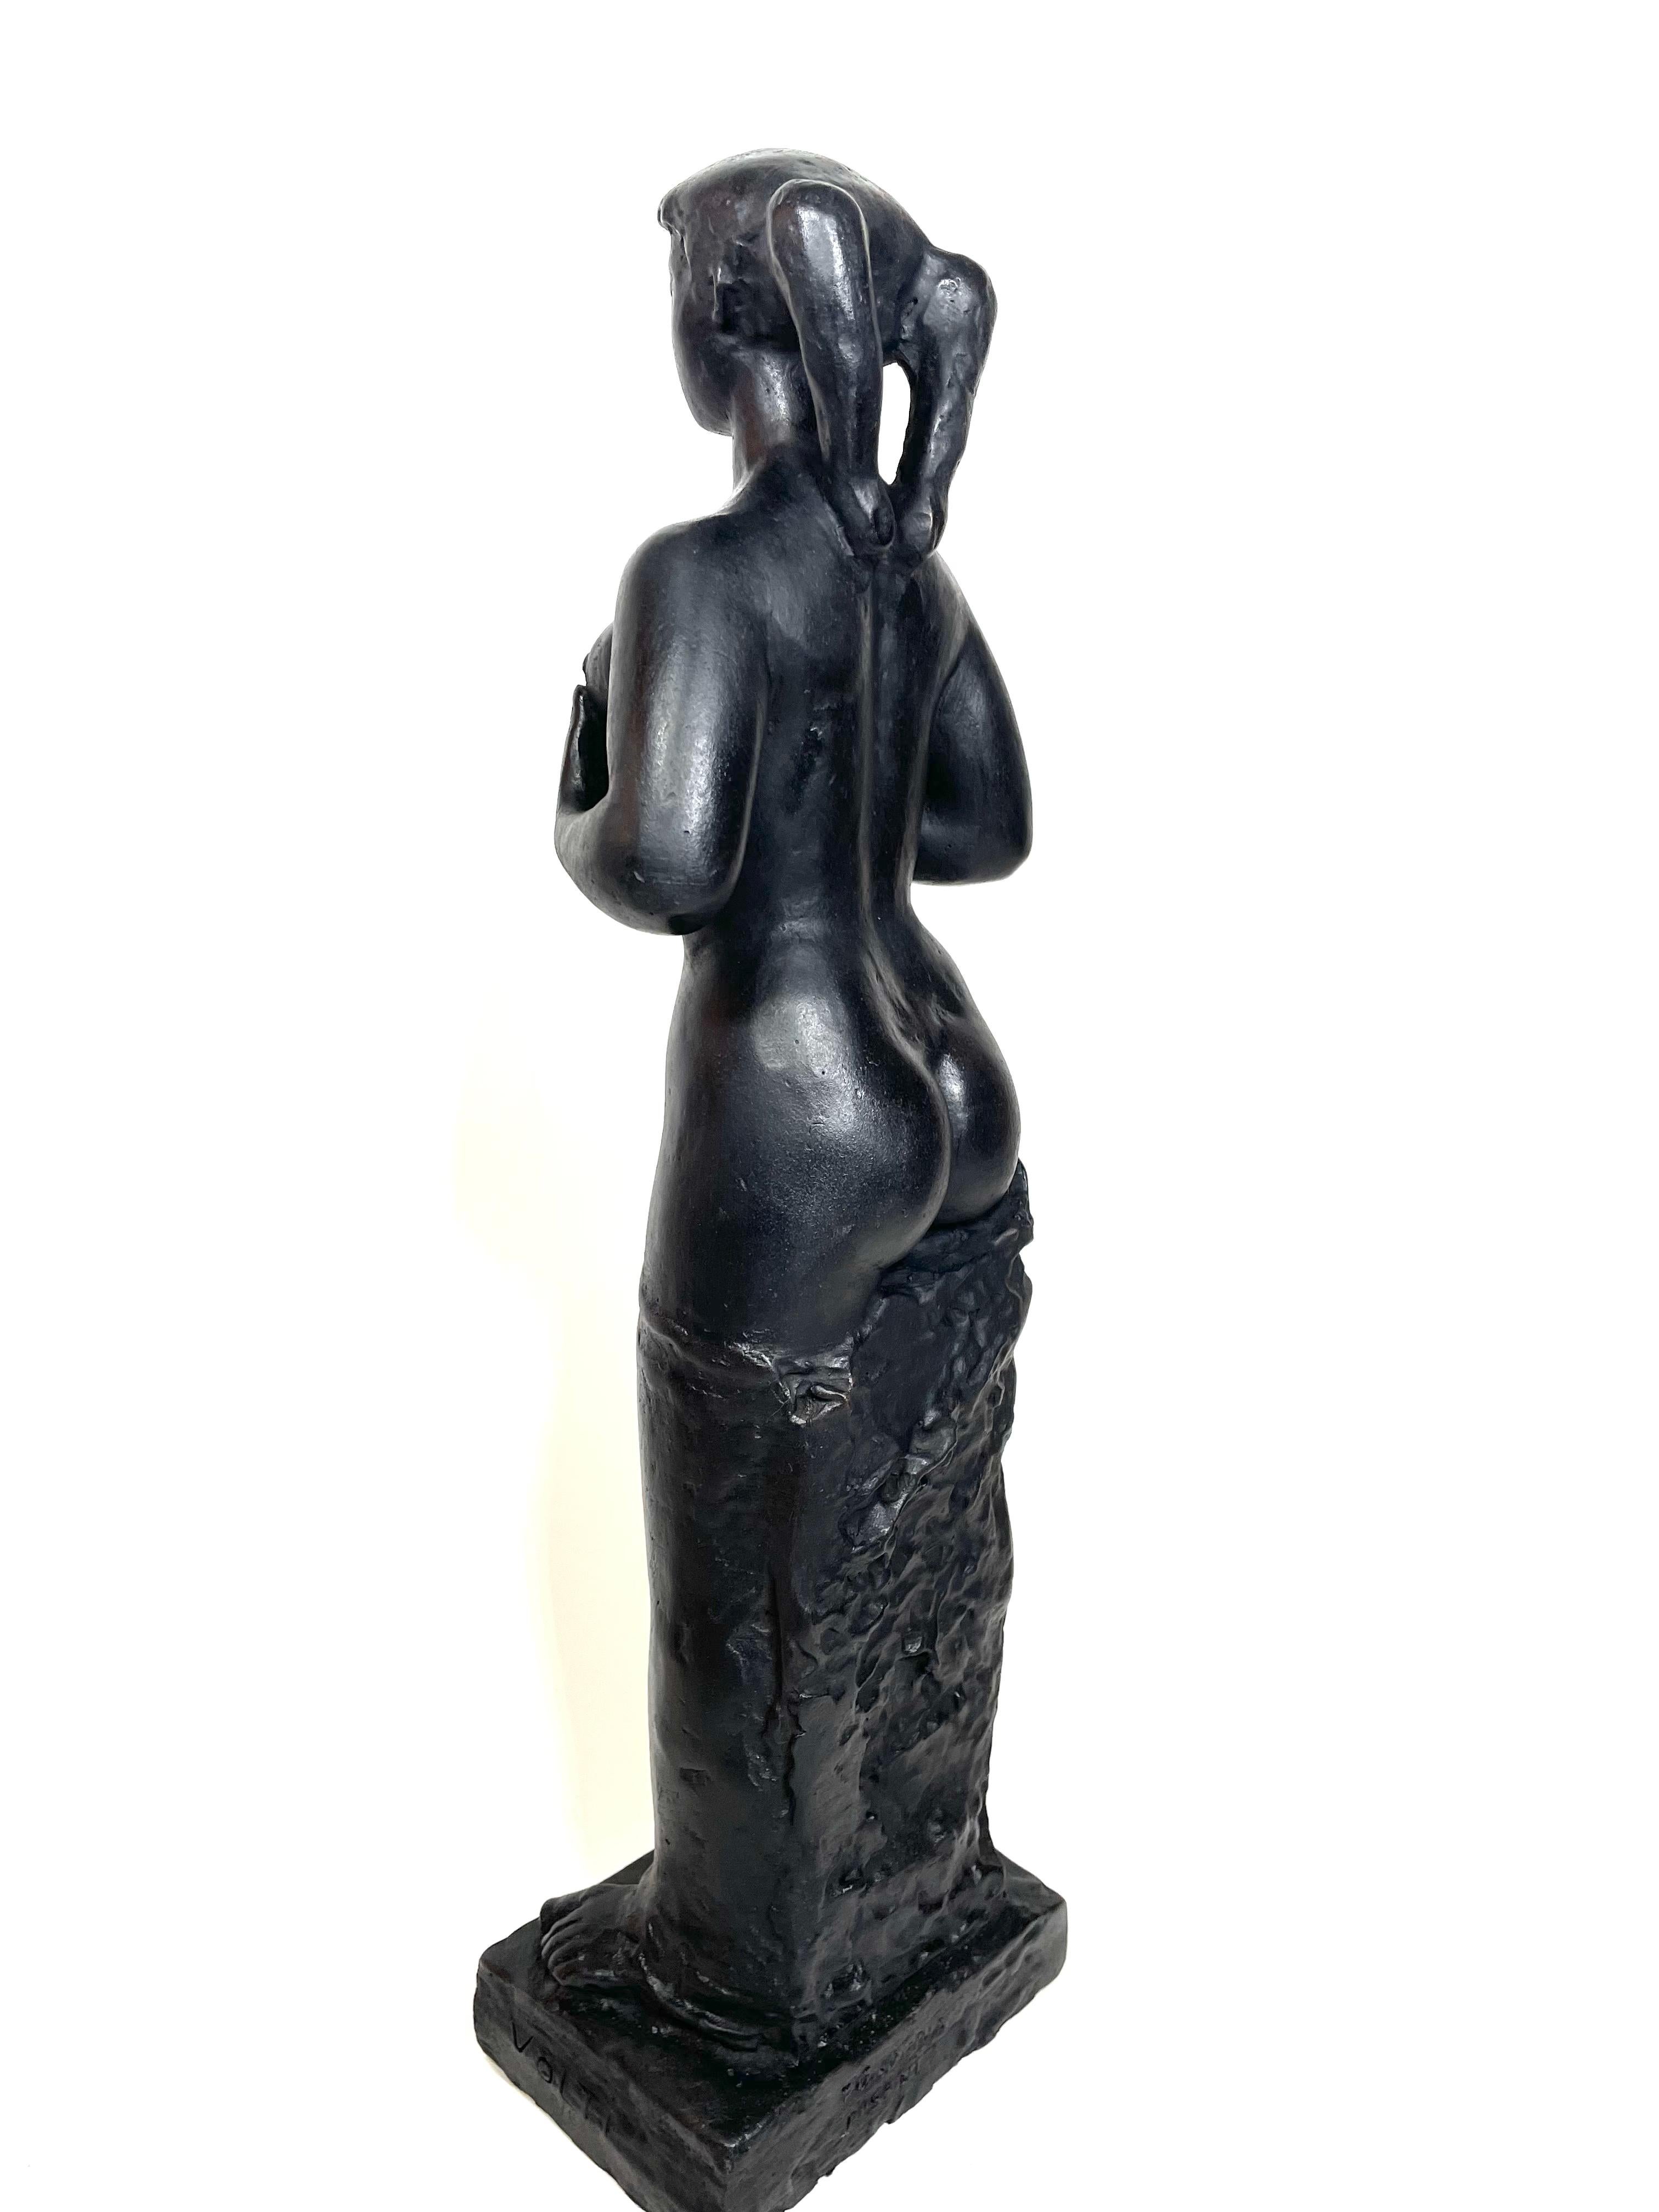 Numbered and limited to 8 copies 
Artwork signed
Authenticity: Sold with certificate of Authenticity from the Indivision Antoniucci Volti
Invoice from the gallery
Sculpture: bronze, metal, bronze patina

Display: The sculpture can be displayed